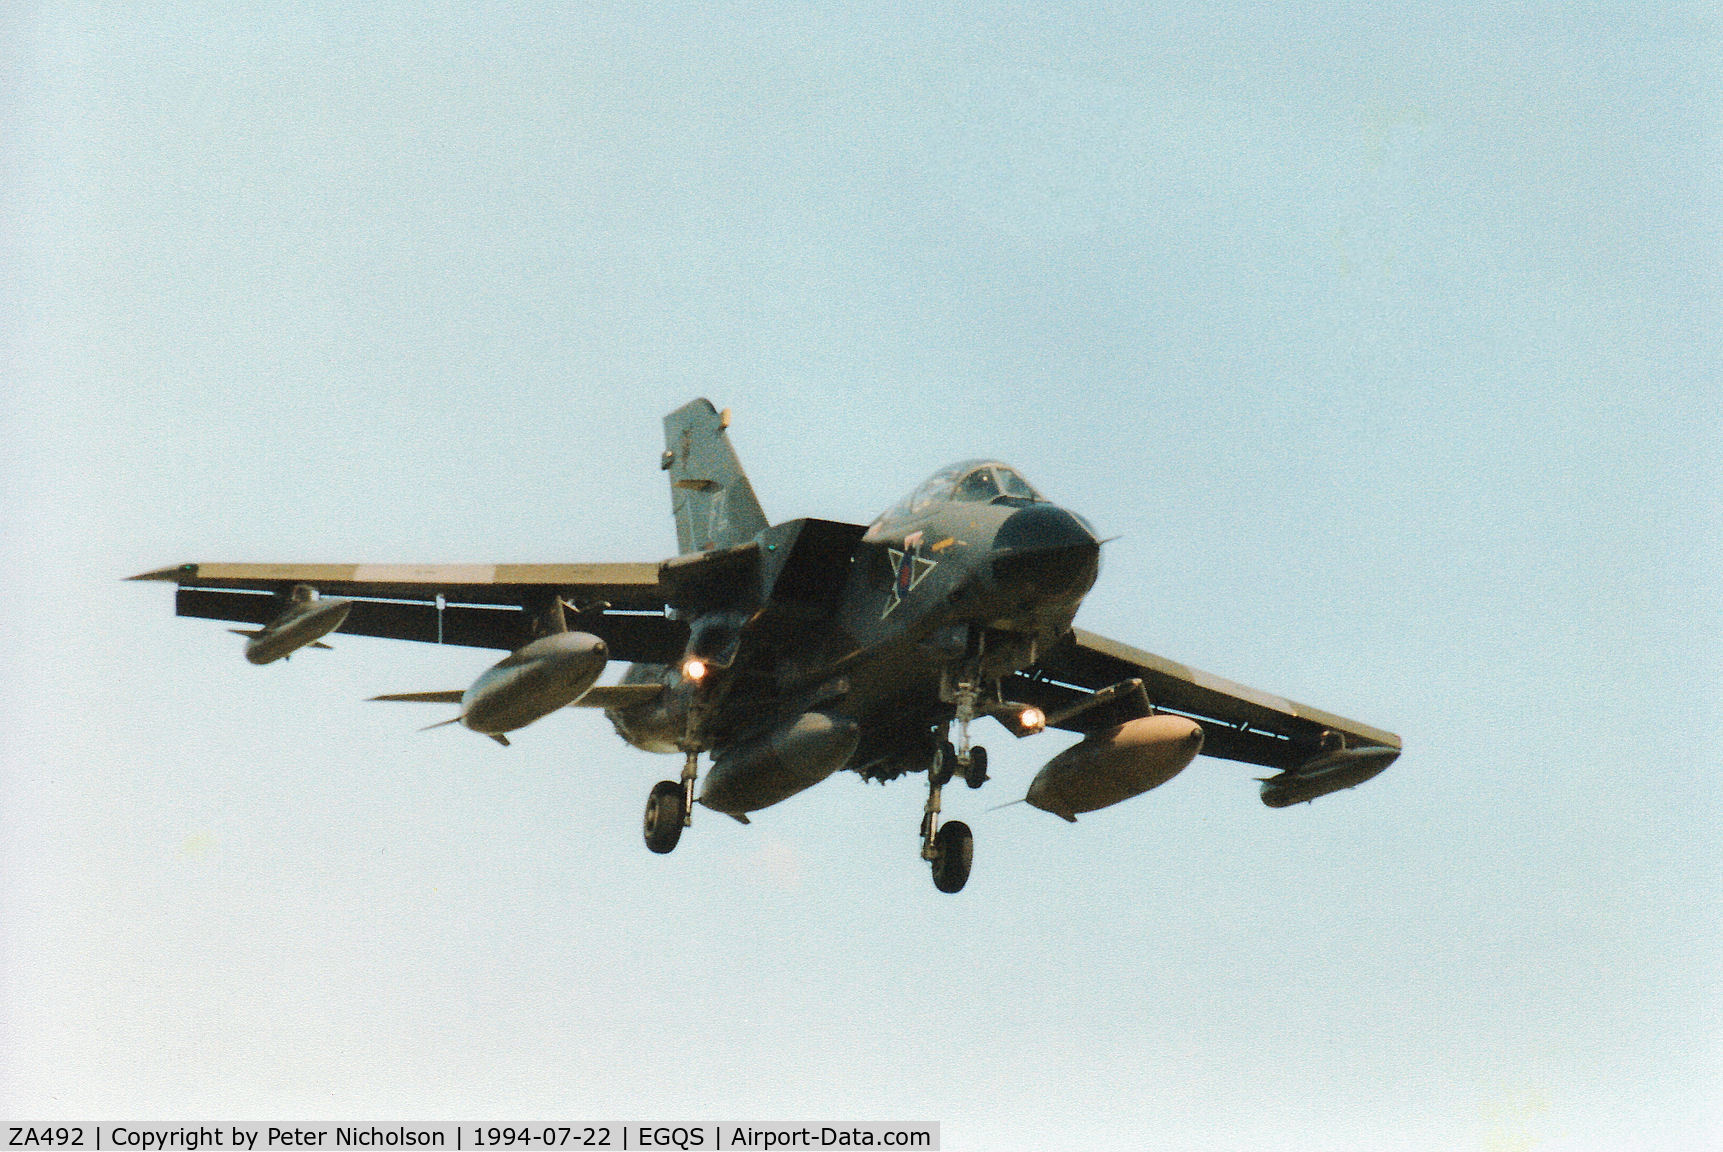 ZA492, 1983 Panavia Tornado GR.1B C/N 310/BS108/3144, Tornado GR.1B of 12 Squadron on final approach to RAF Lossiemouth in the Summer of 1994.